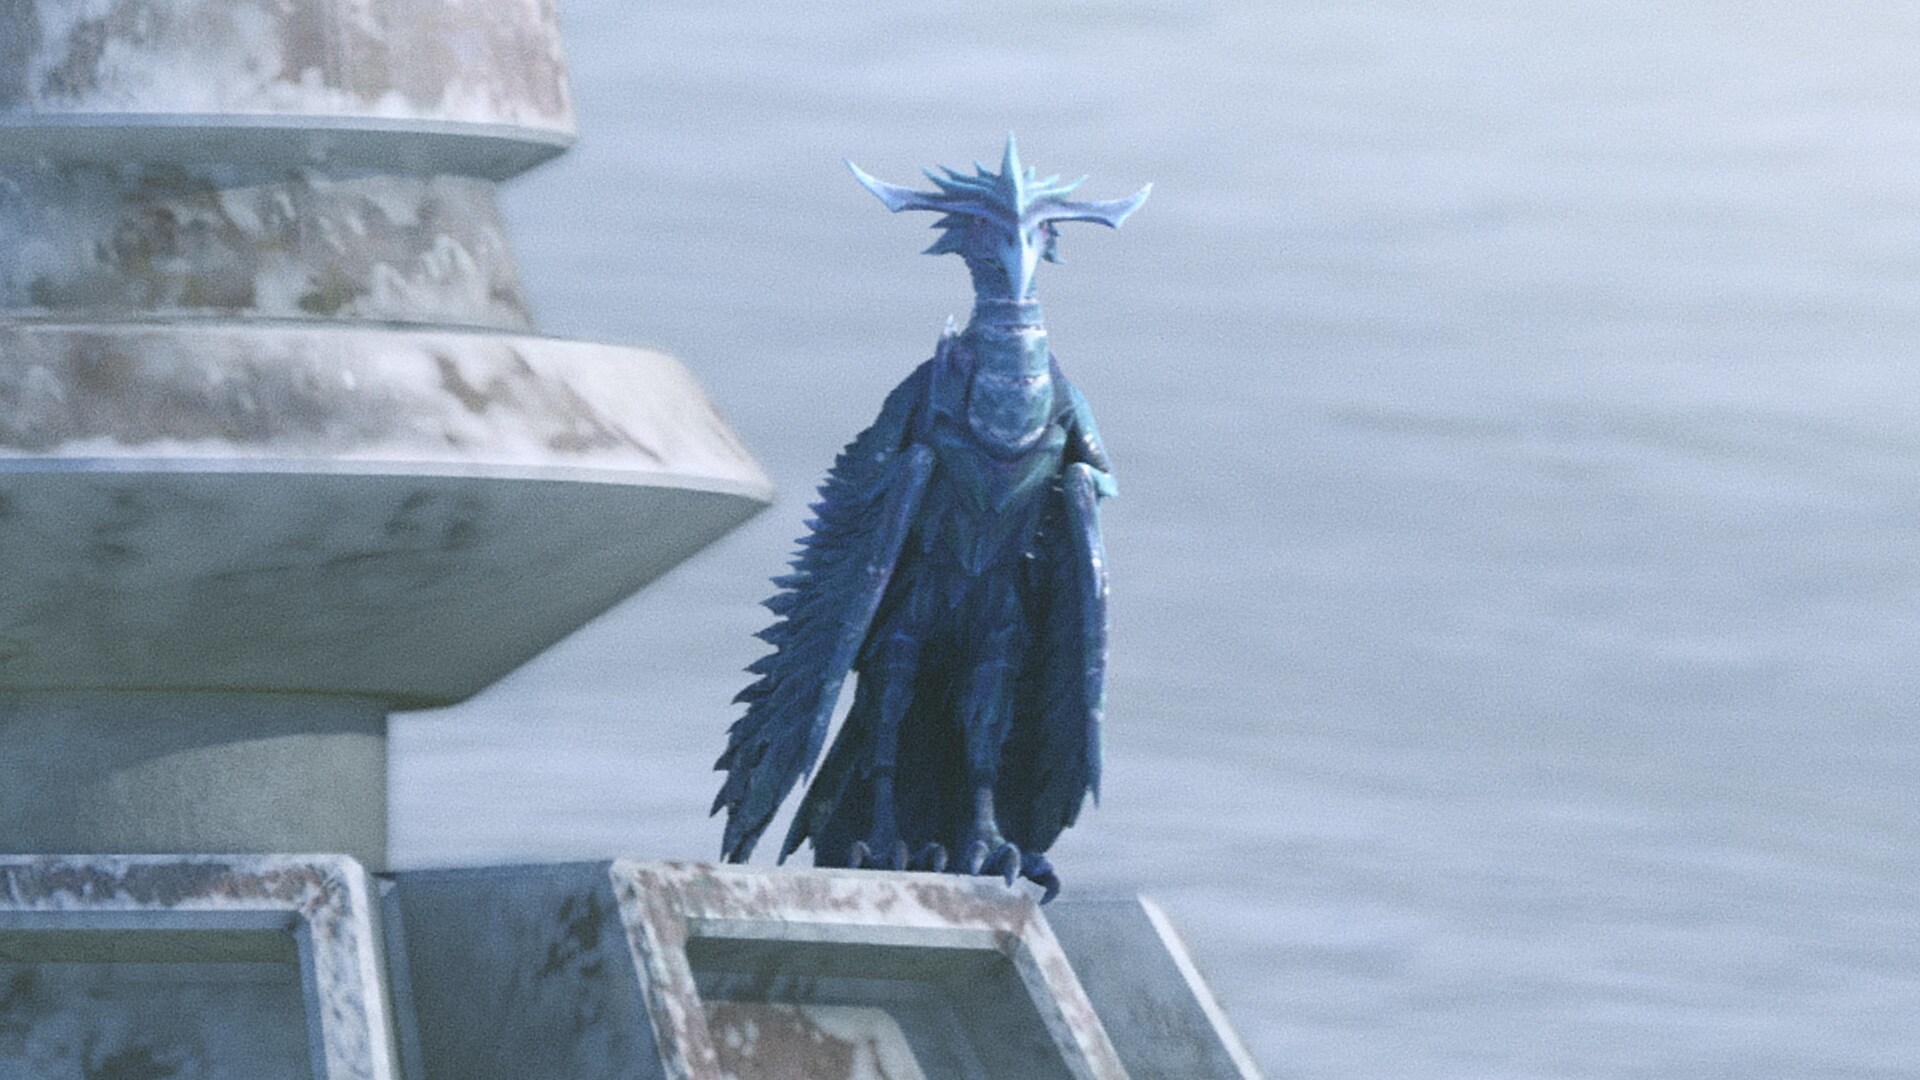 The birdlike creature Crosshair spies is described in the script as an “ice vulture.”